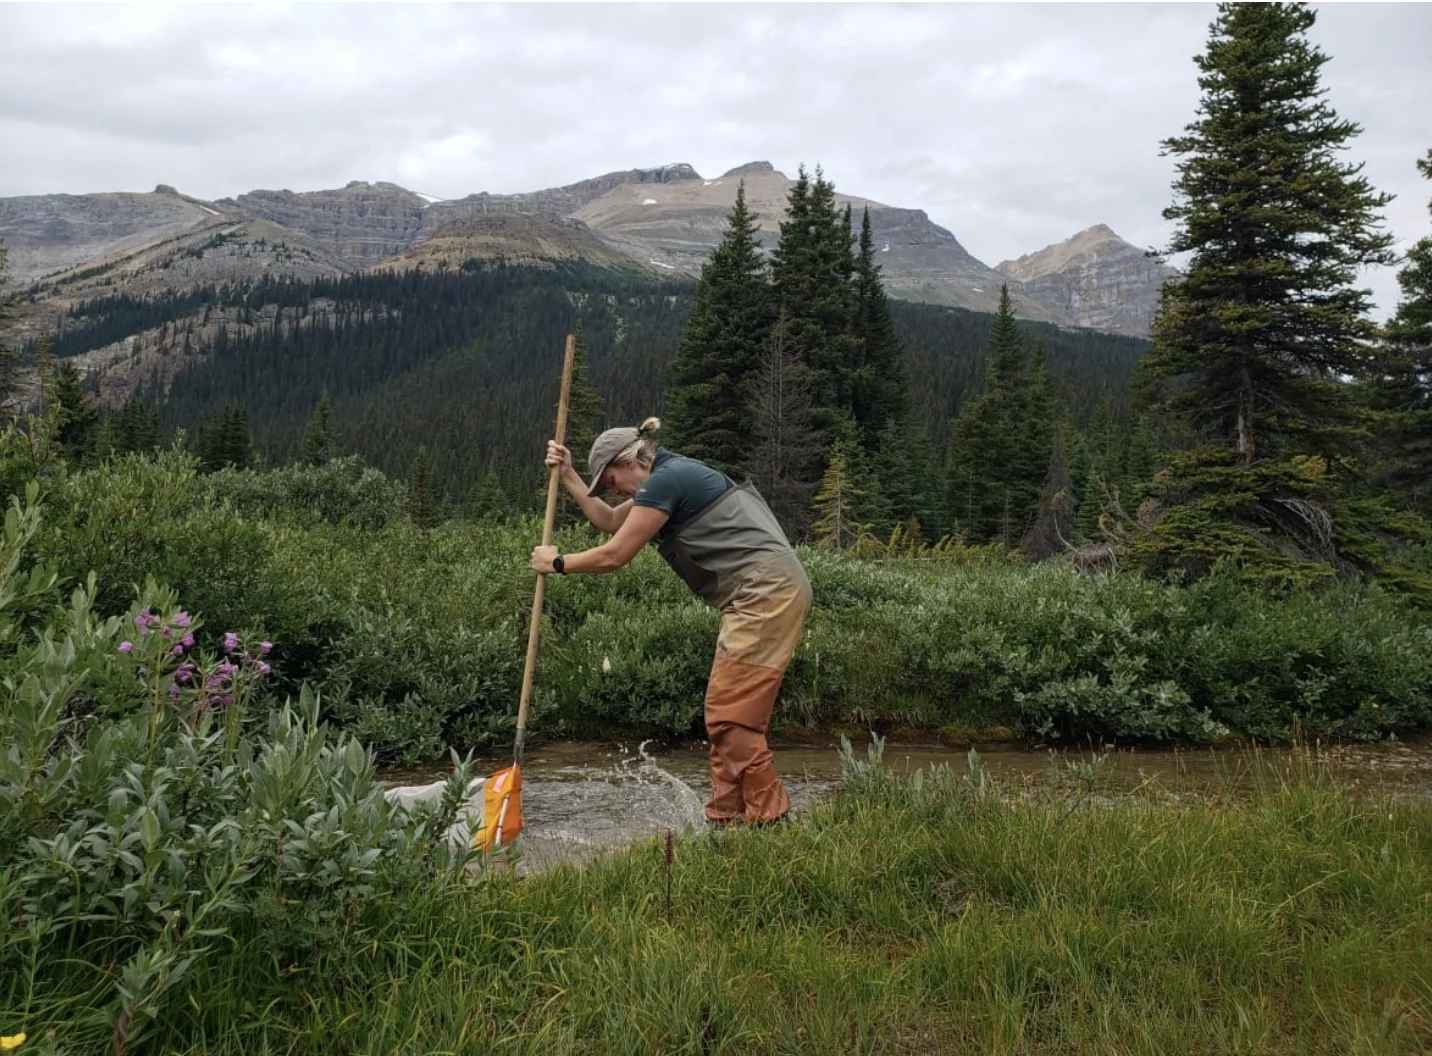 PARKS CANADA: Parks Canada ecosystem scientist Megan Goudie performs a kicknet search near Bow Lake. (Parks Canada)